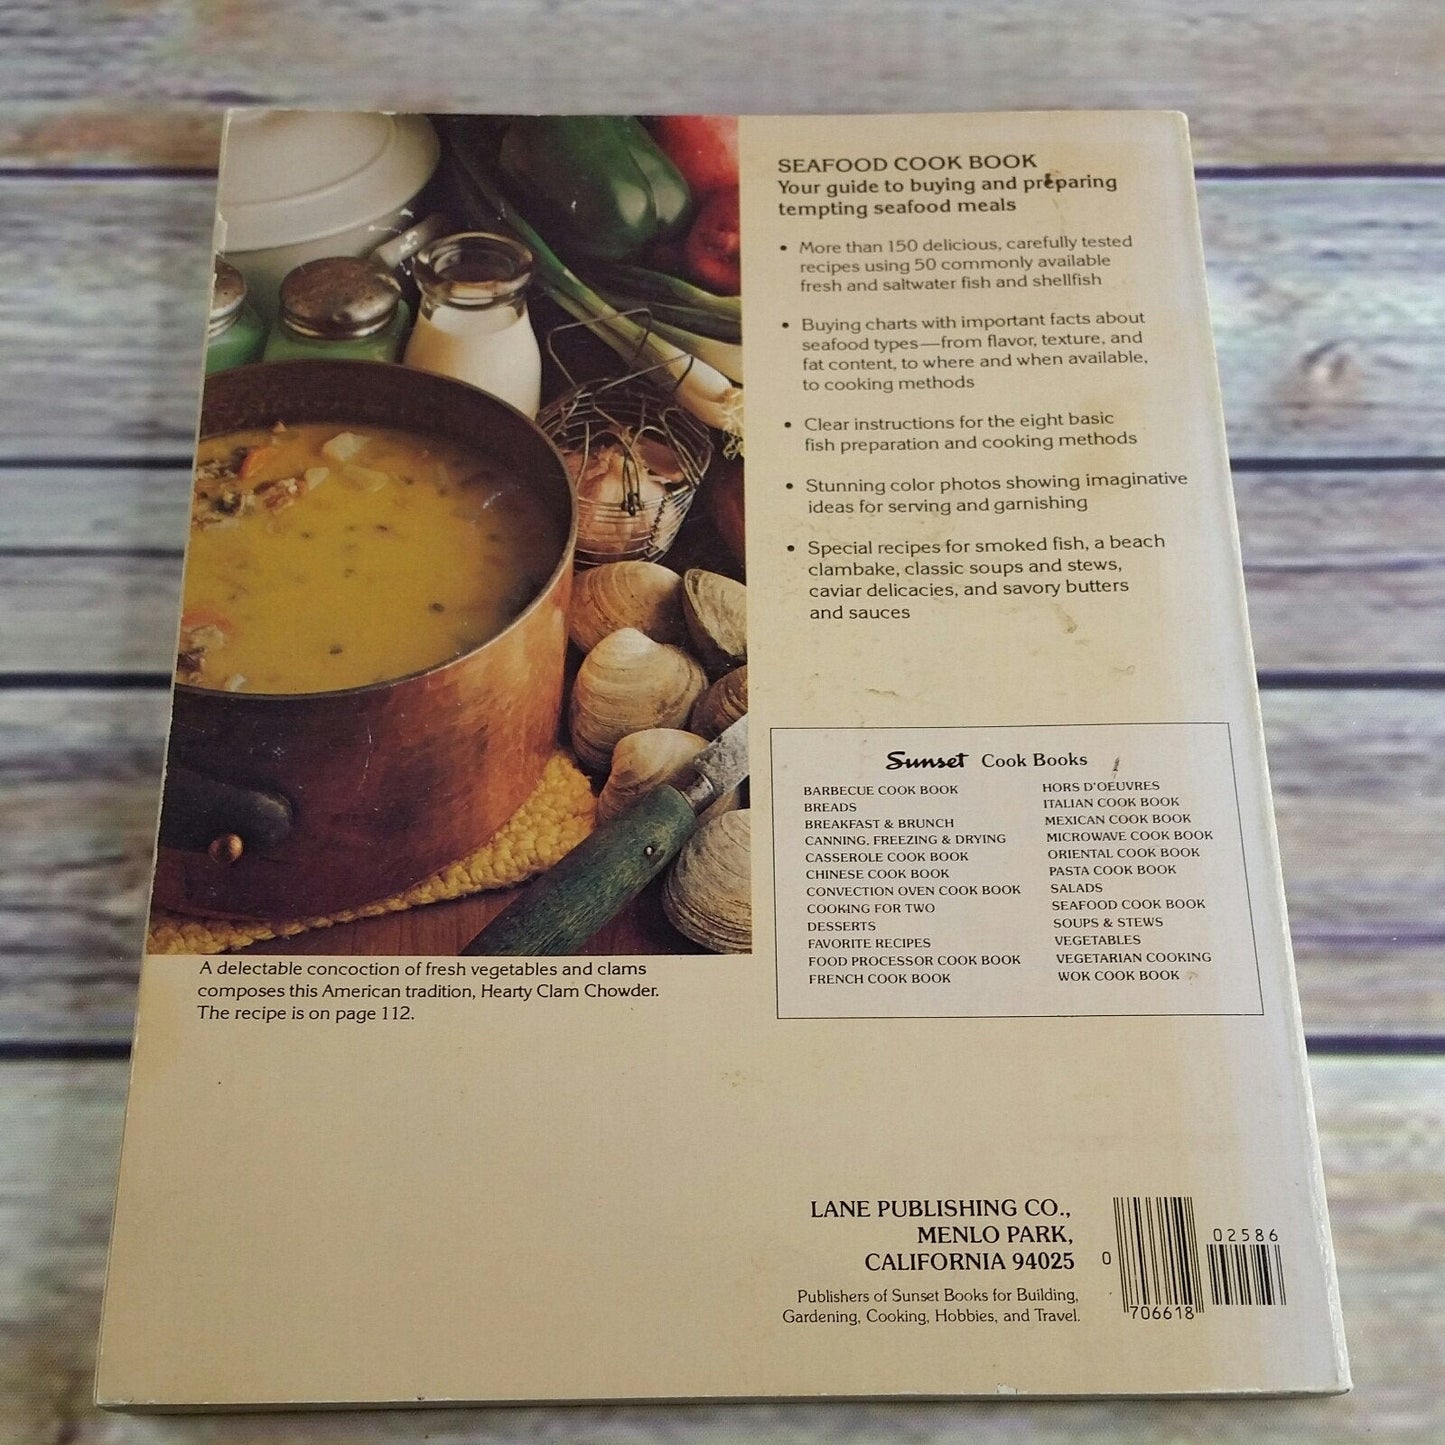 Vintage Cookbook Sunset Seafood Recipes 1981 Paperback How To Select Prepare and Cook 8 Basic Cooking Methods